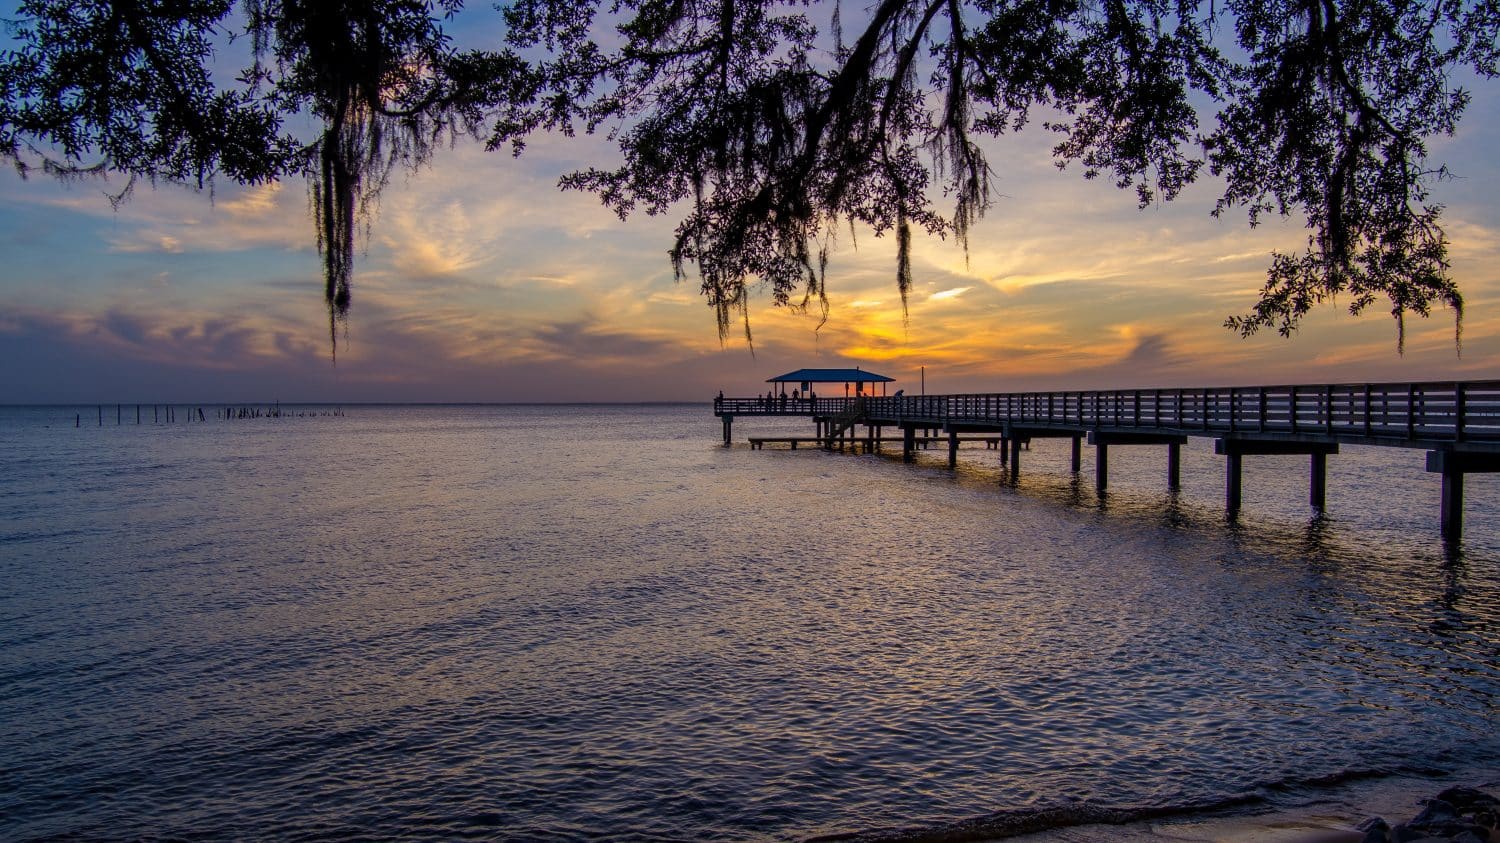 Pier on Mobile Bay at sunset from Mayday Park in Daphne, Alabama 